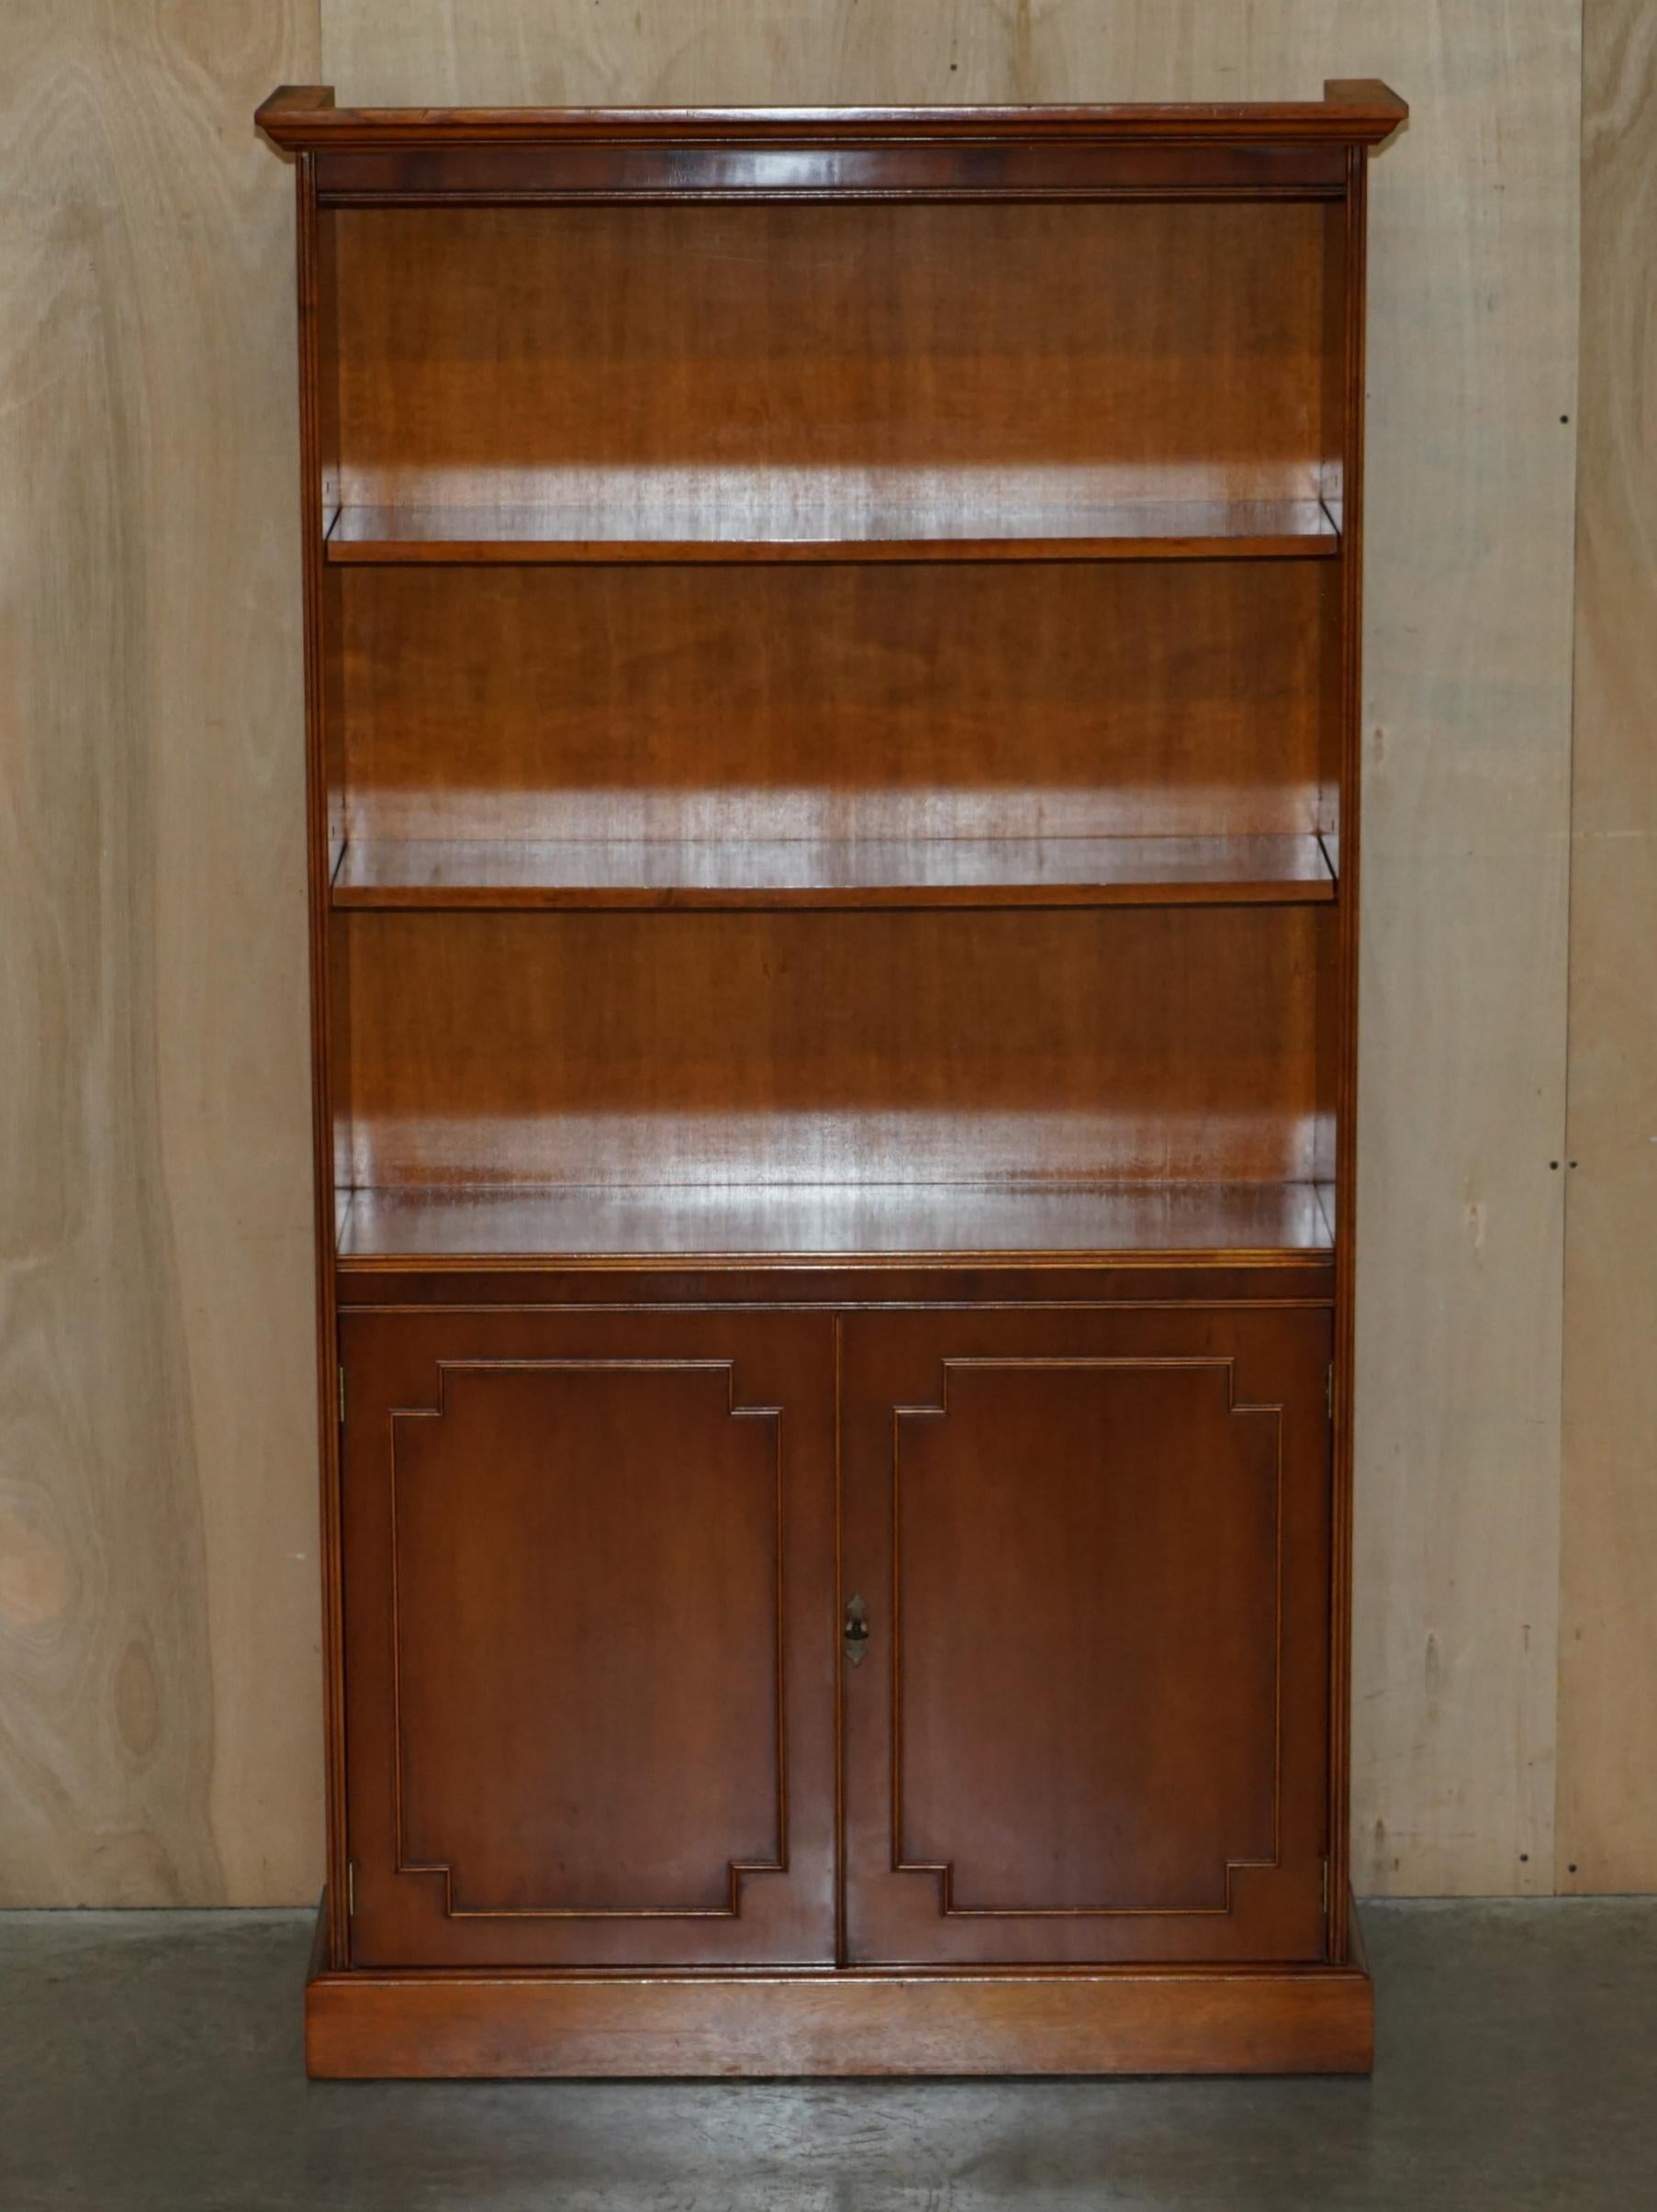 We are delighted to offer for this lovely vintage Bradley Furniture England Yew wood & Brass Military Campaign open library bookcase with cupboard base

A very good looking well made and decorative piece, it is very rare to find this bookcase in